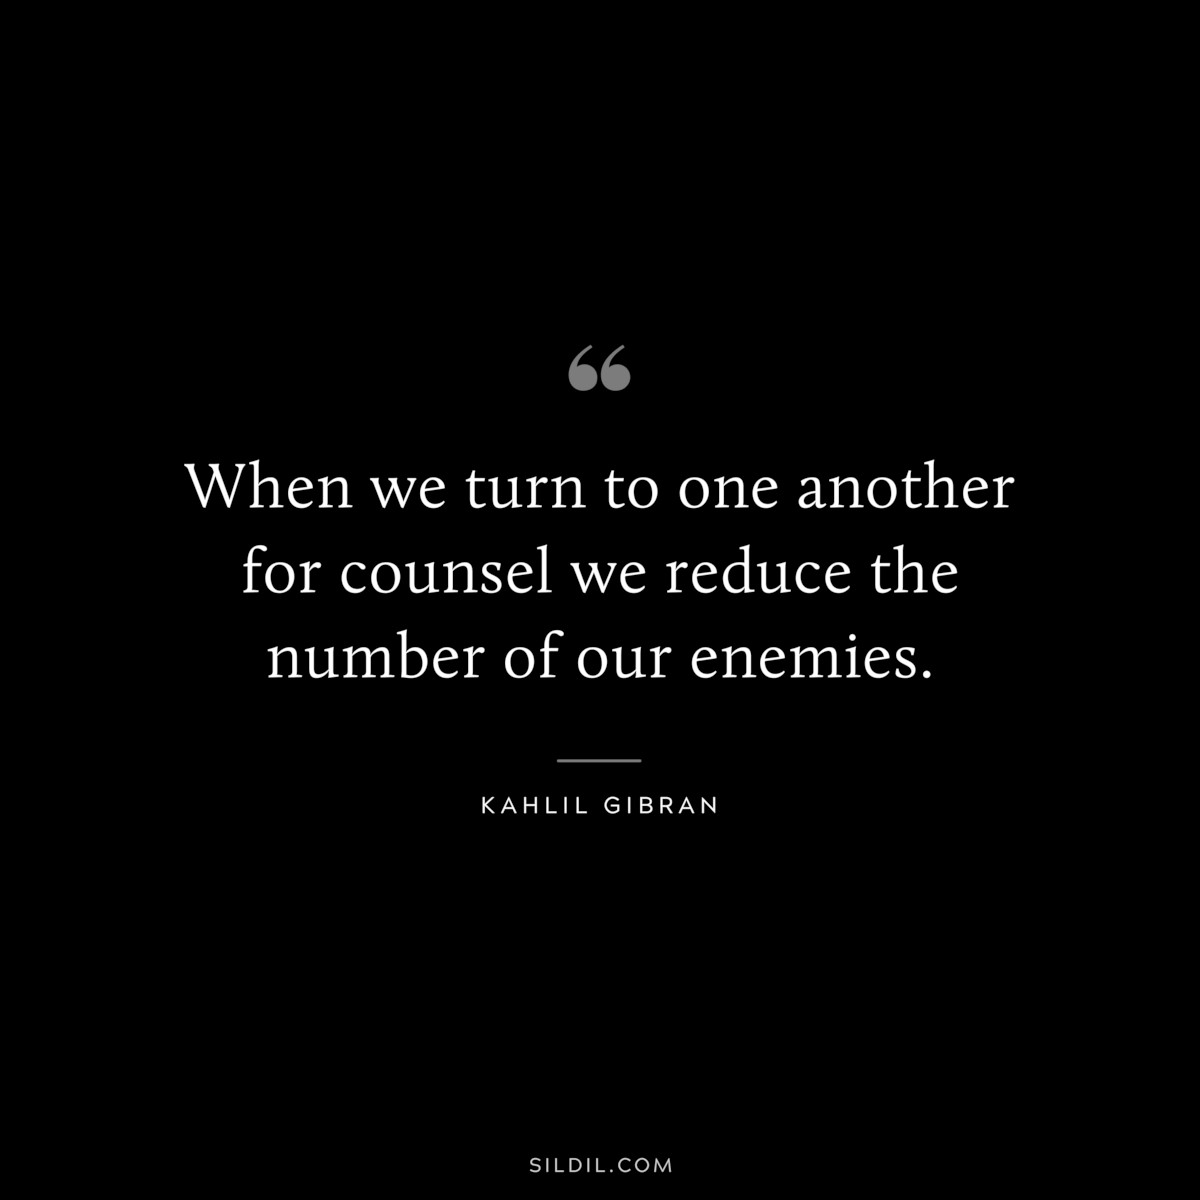 When we turn to one another for counsel we reduce the number of our enemies. ― Kahlil Gibran